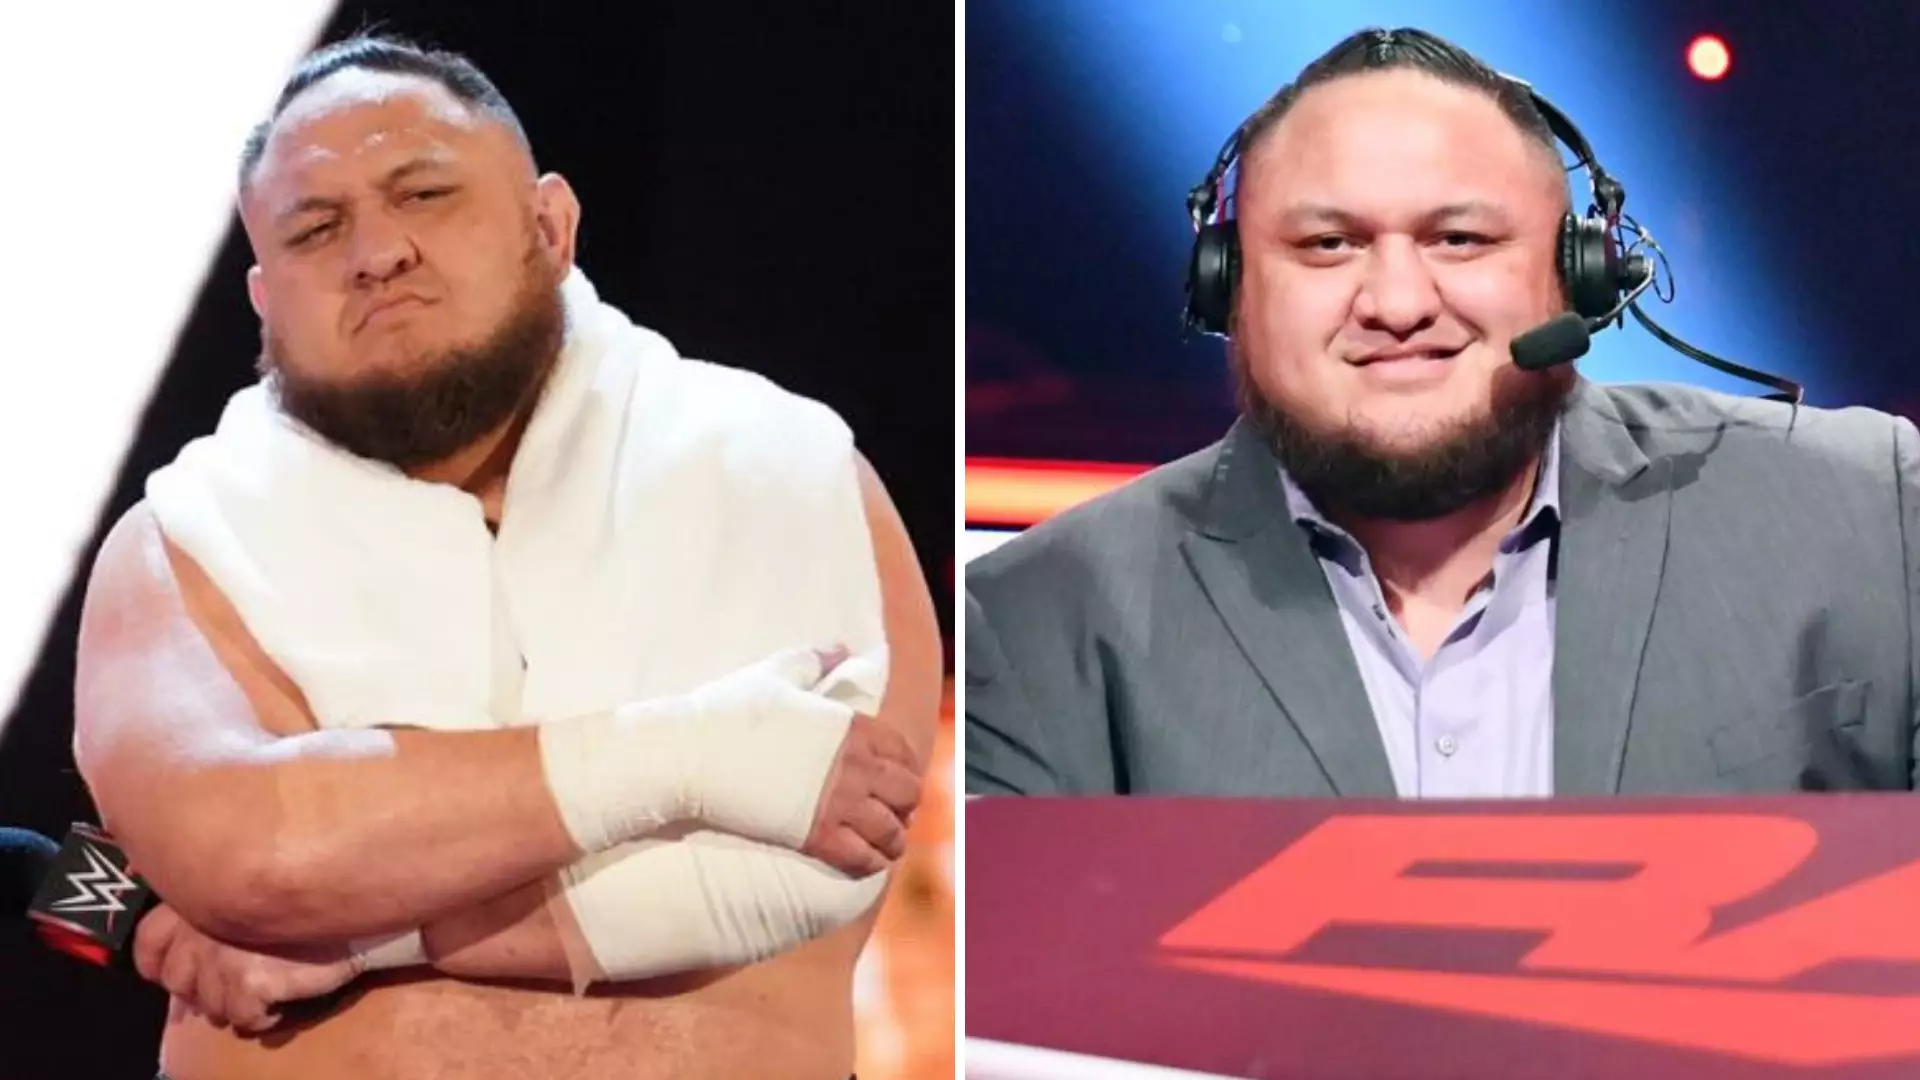 WWE Star Samoa Joe Opens Door For Commentary Role Once He Retires From Wrestling